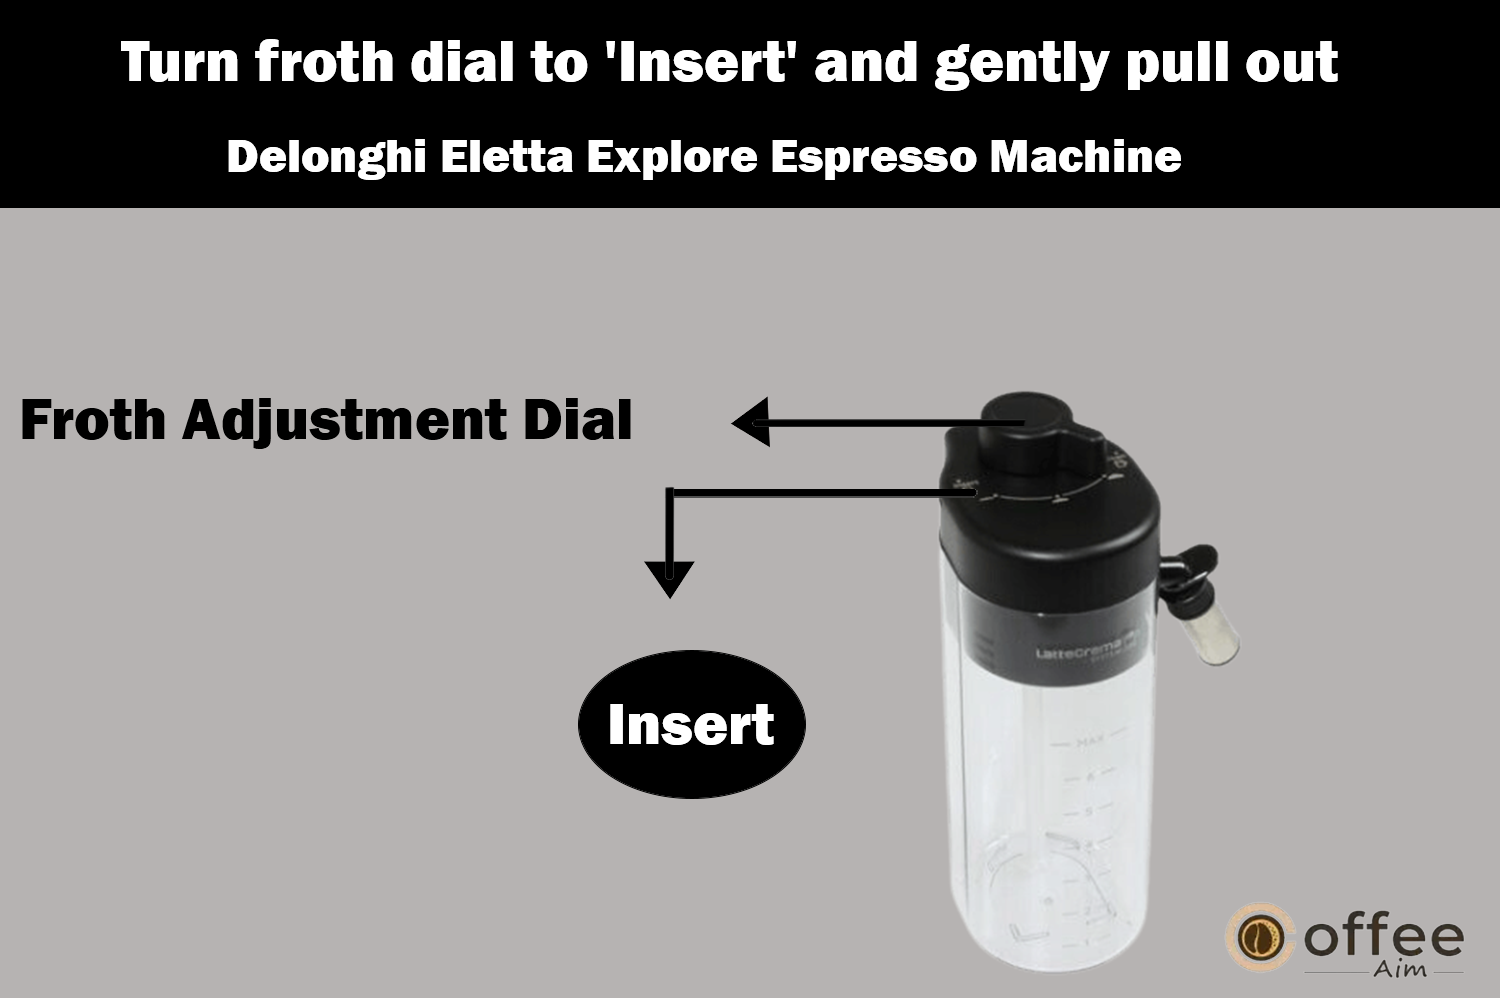 The image illustrates the action of turning the froth dial to the 'insert' position and gently pulling it out from the "Delonghi Eletta Explore Espresso Machine," as described in the article "How to Use the Delonghi Eletta Explore Espresso Machine."